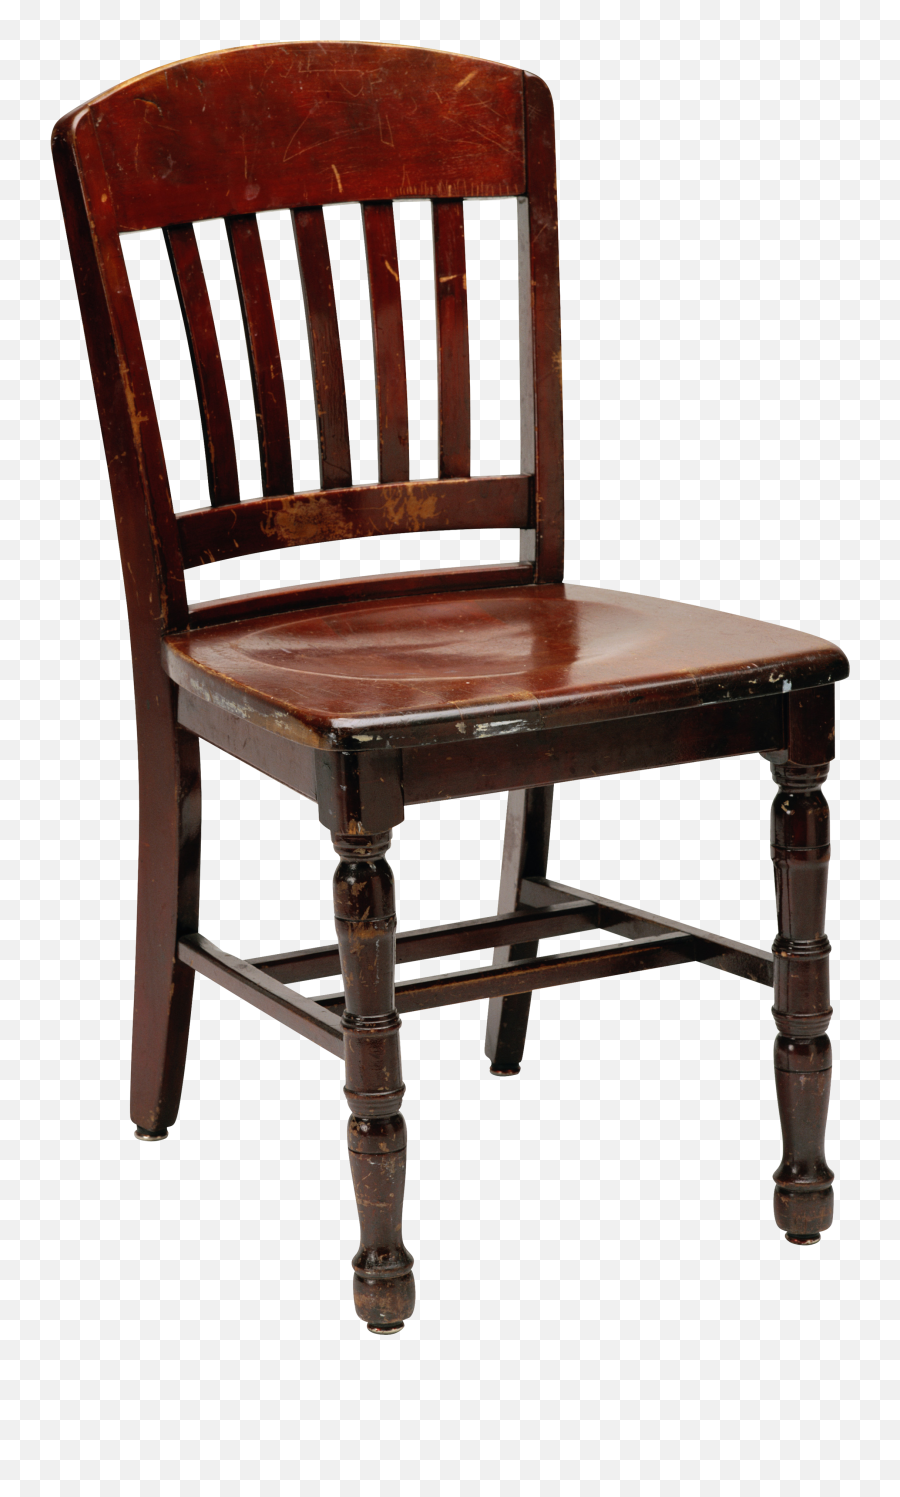 Old Chair Png Transparent Collections - Chair Png Images Hd,Old Photo Png